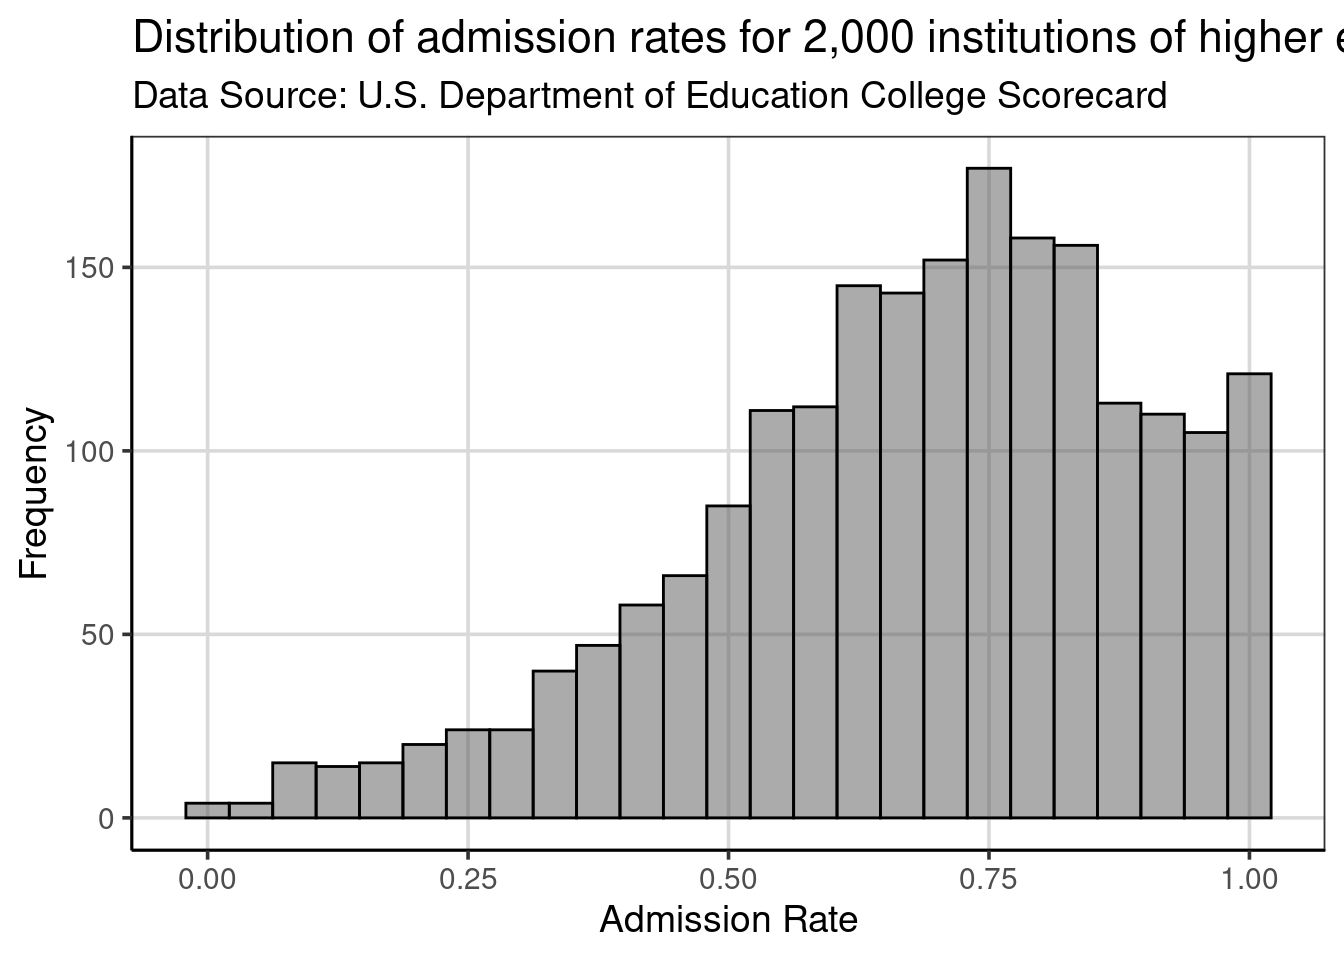 Histogram showing the distribution of admission rates for institutions of higher education.